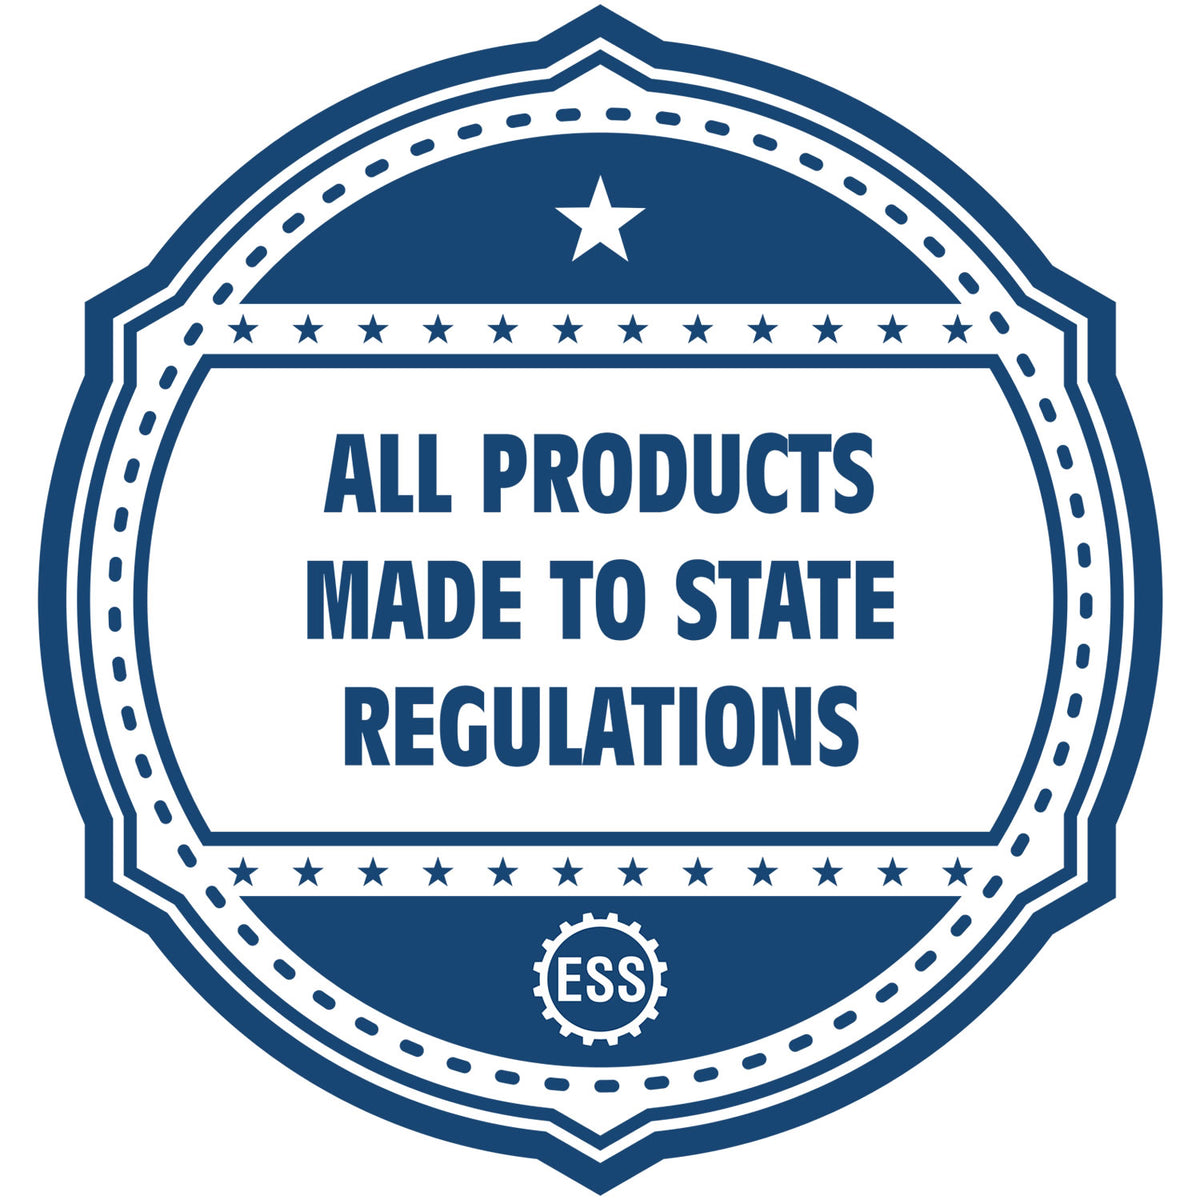 An icon or badge element for the Slim Pre-Inked Arizona Land Surveyor Seal Stamp showing that this product is made in compliance with state regulations.